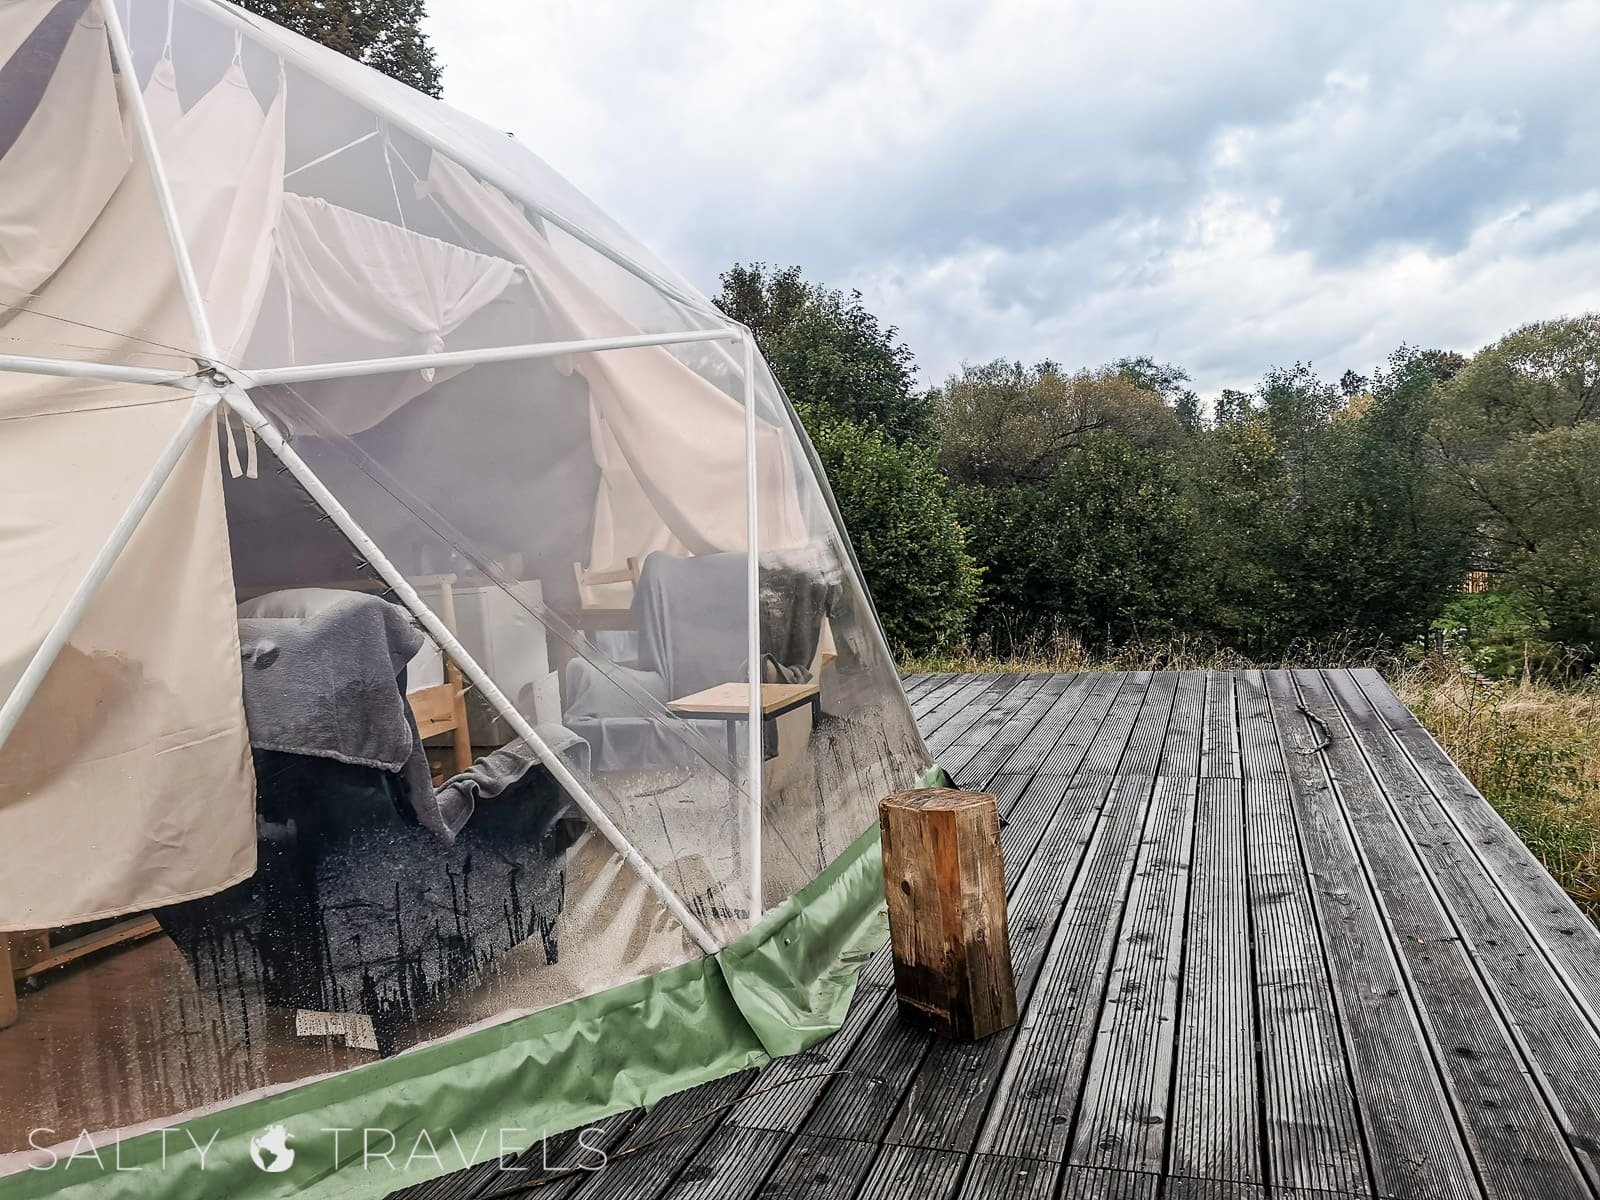 Salty Travels glamping